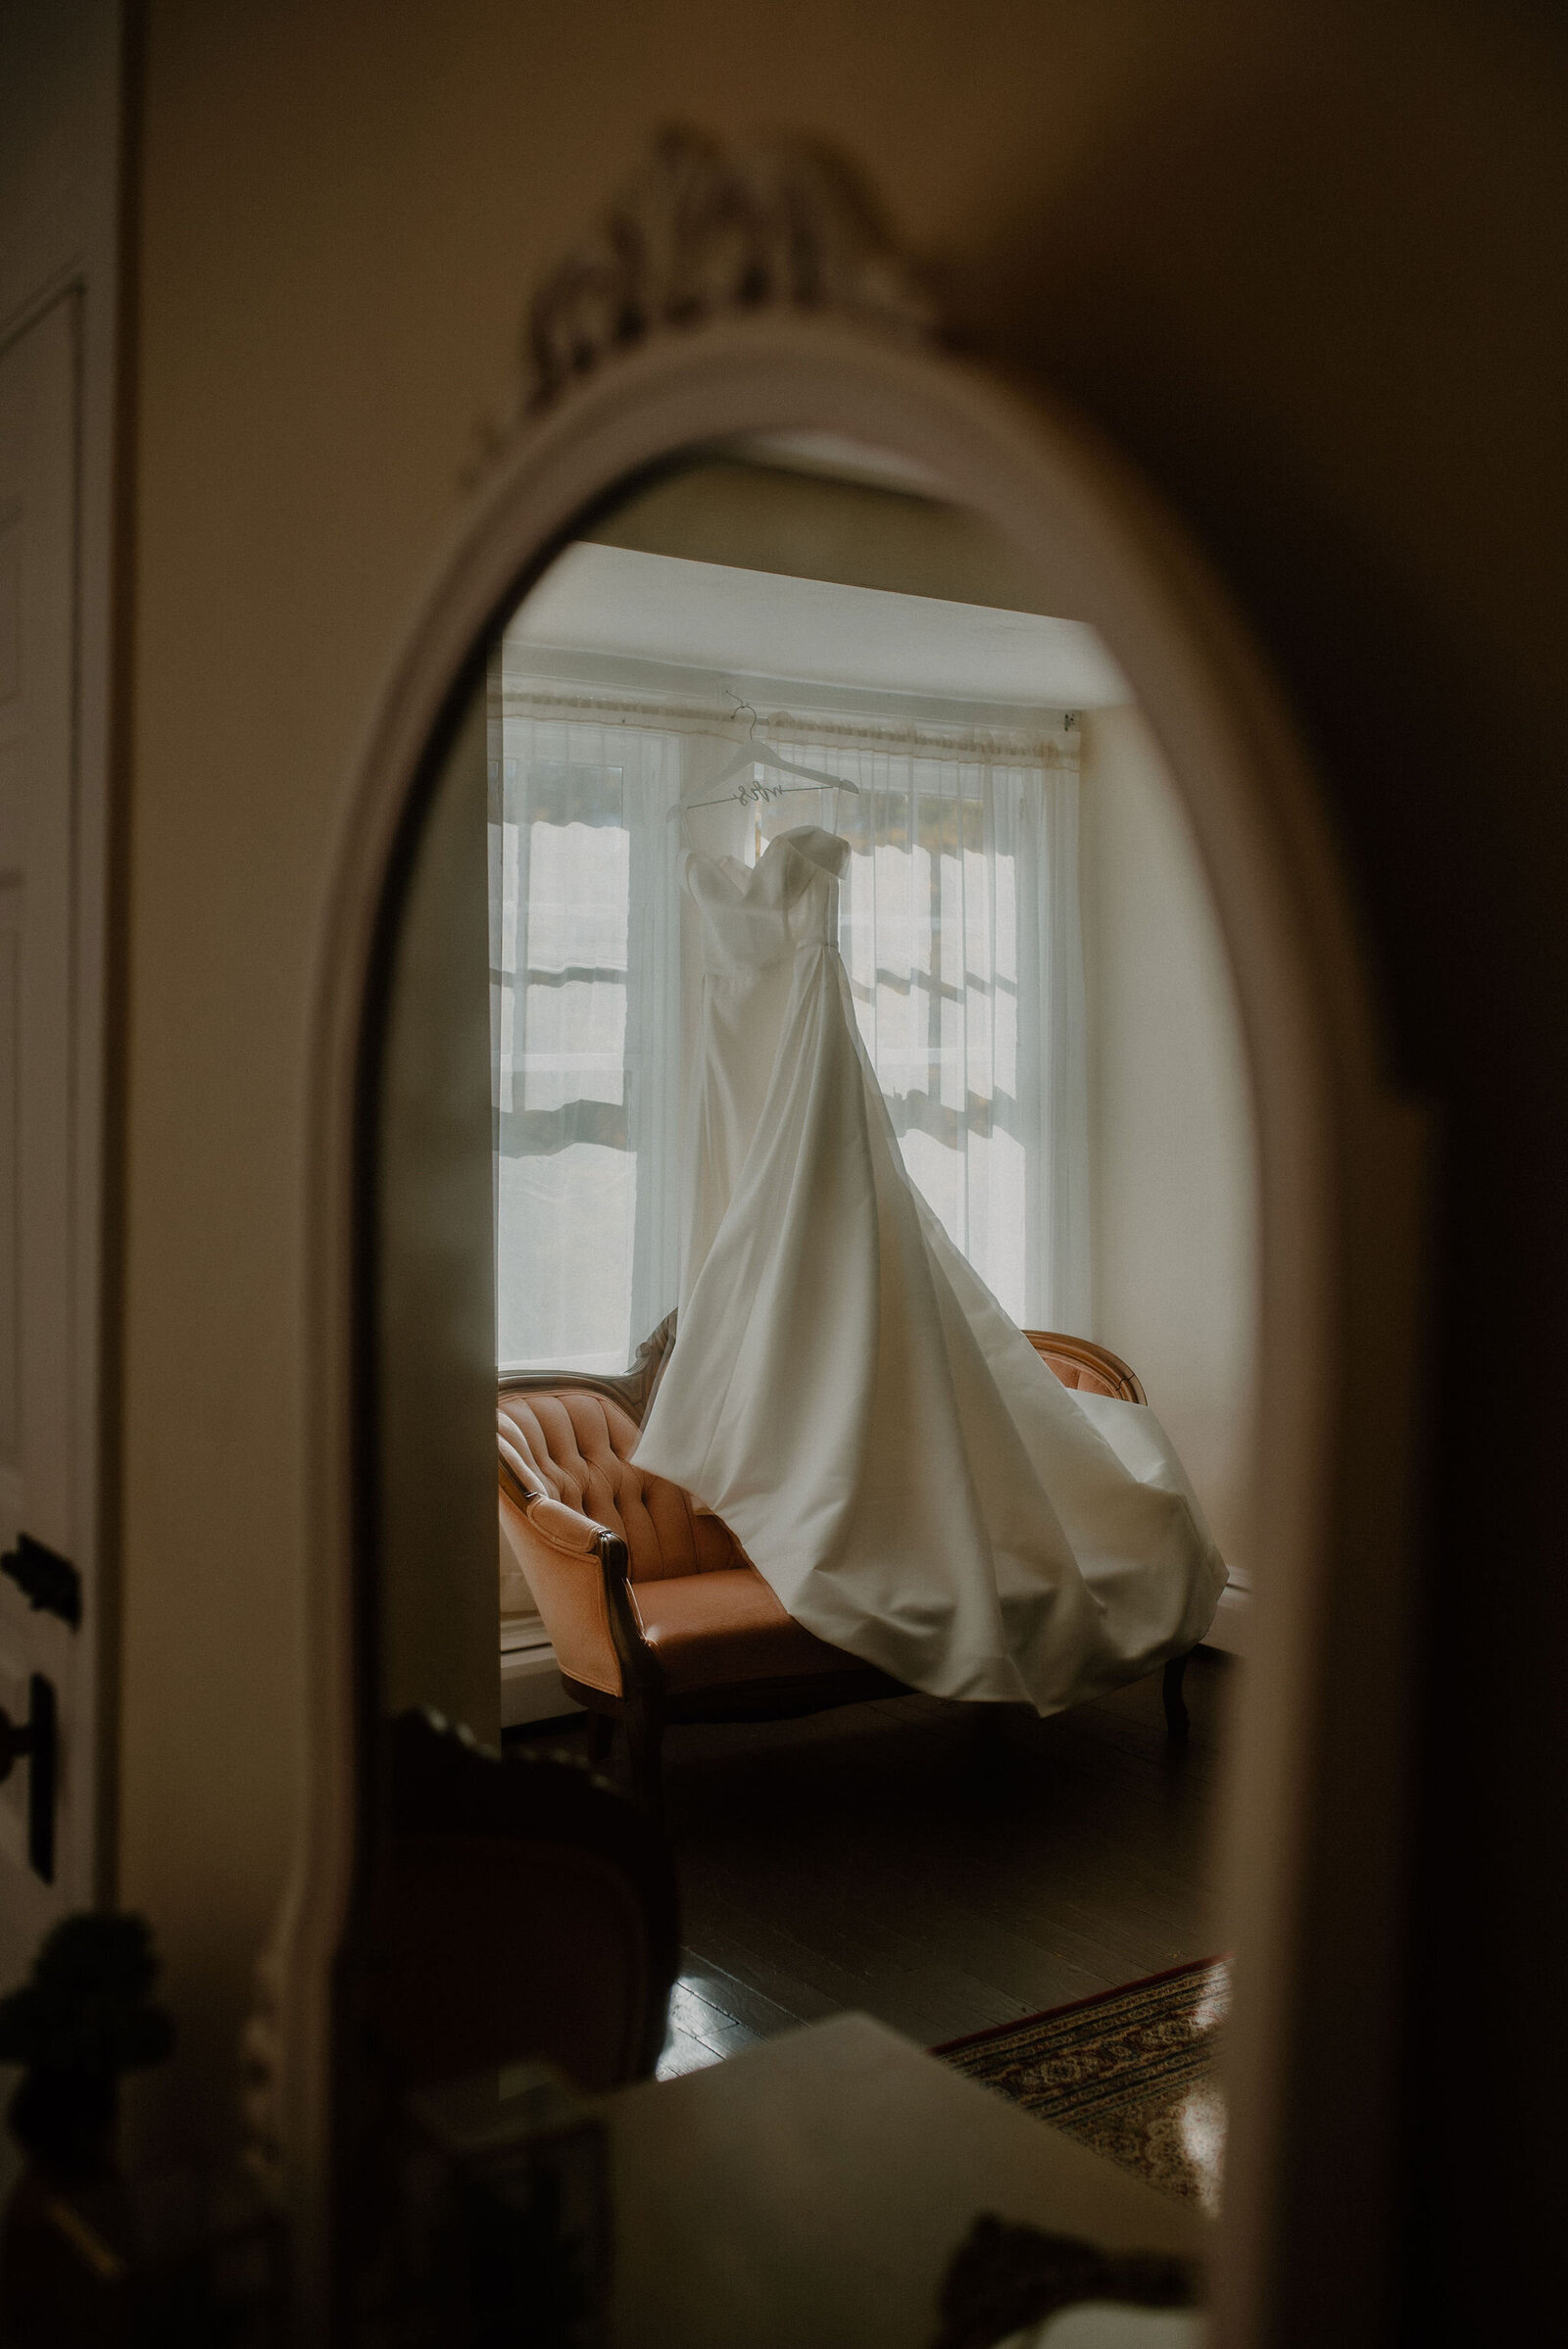 mirror reflection of wedding dress hanging in window over royal vintage couch